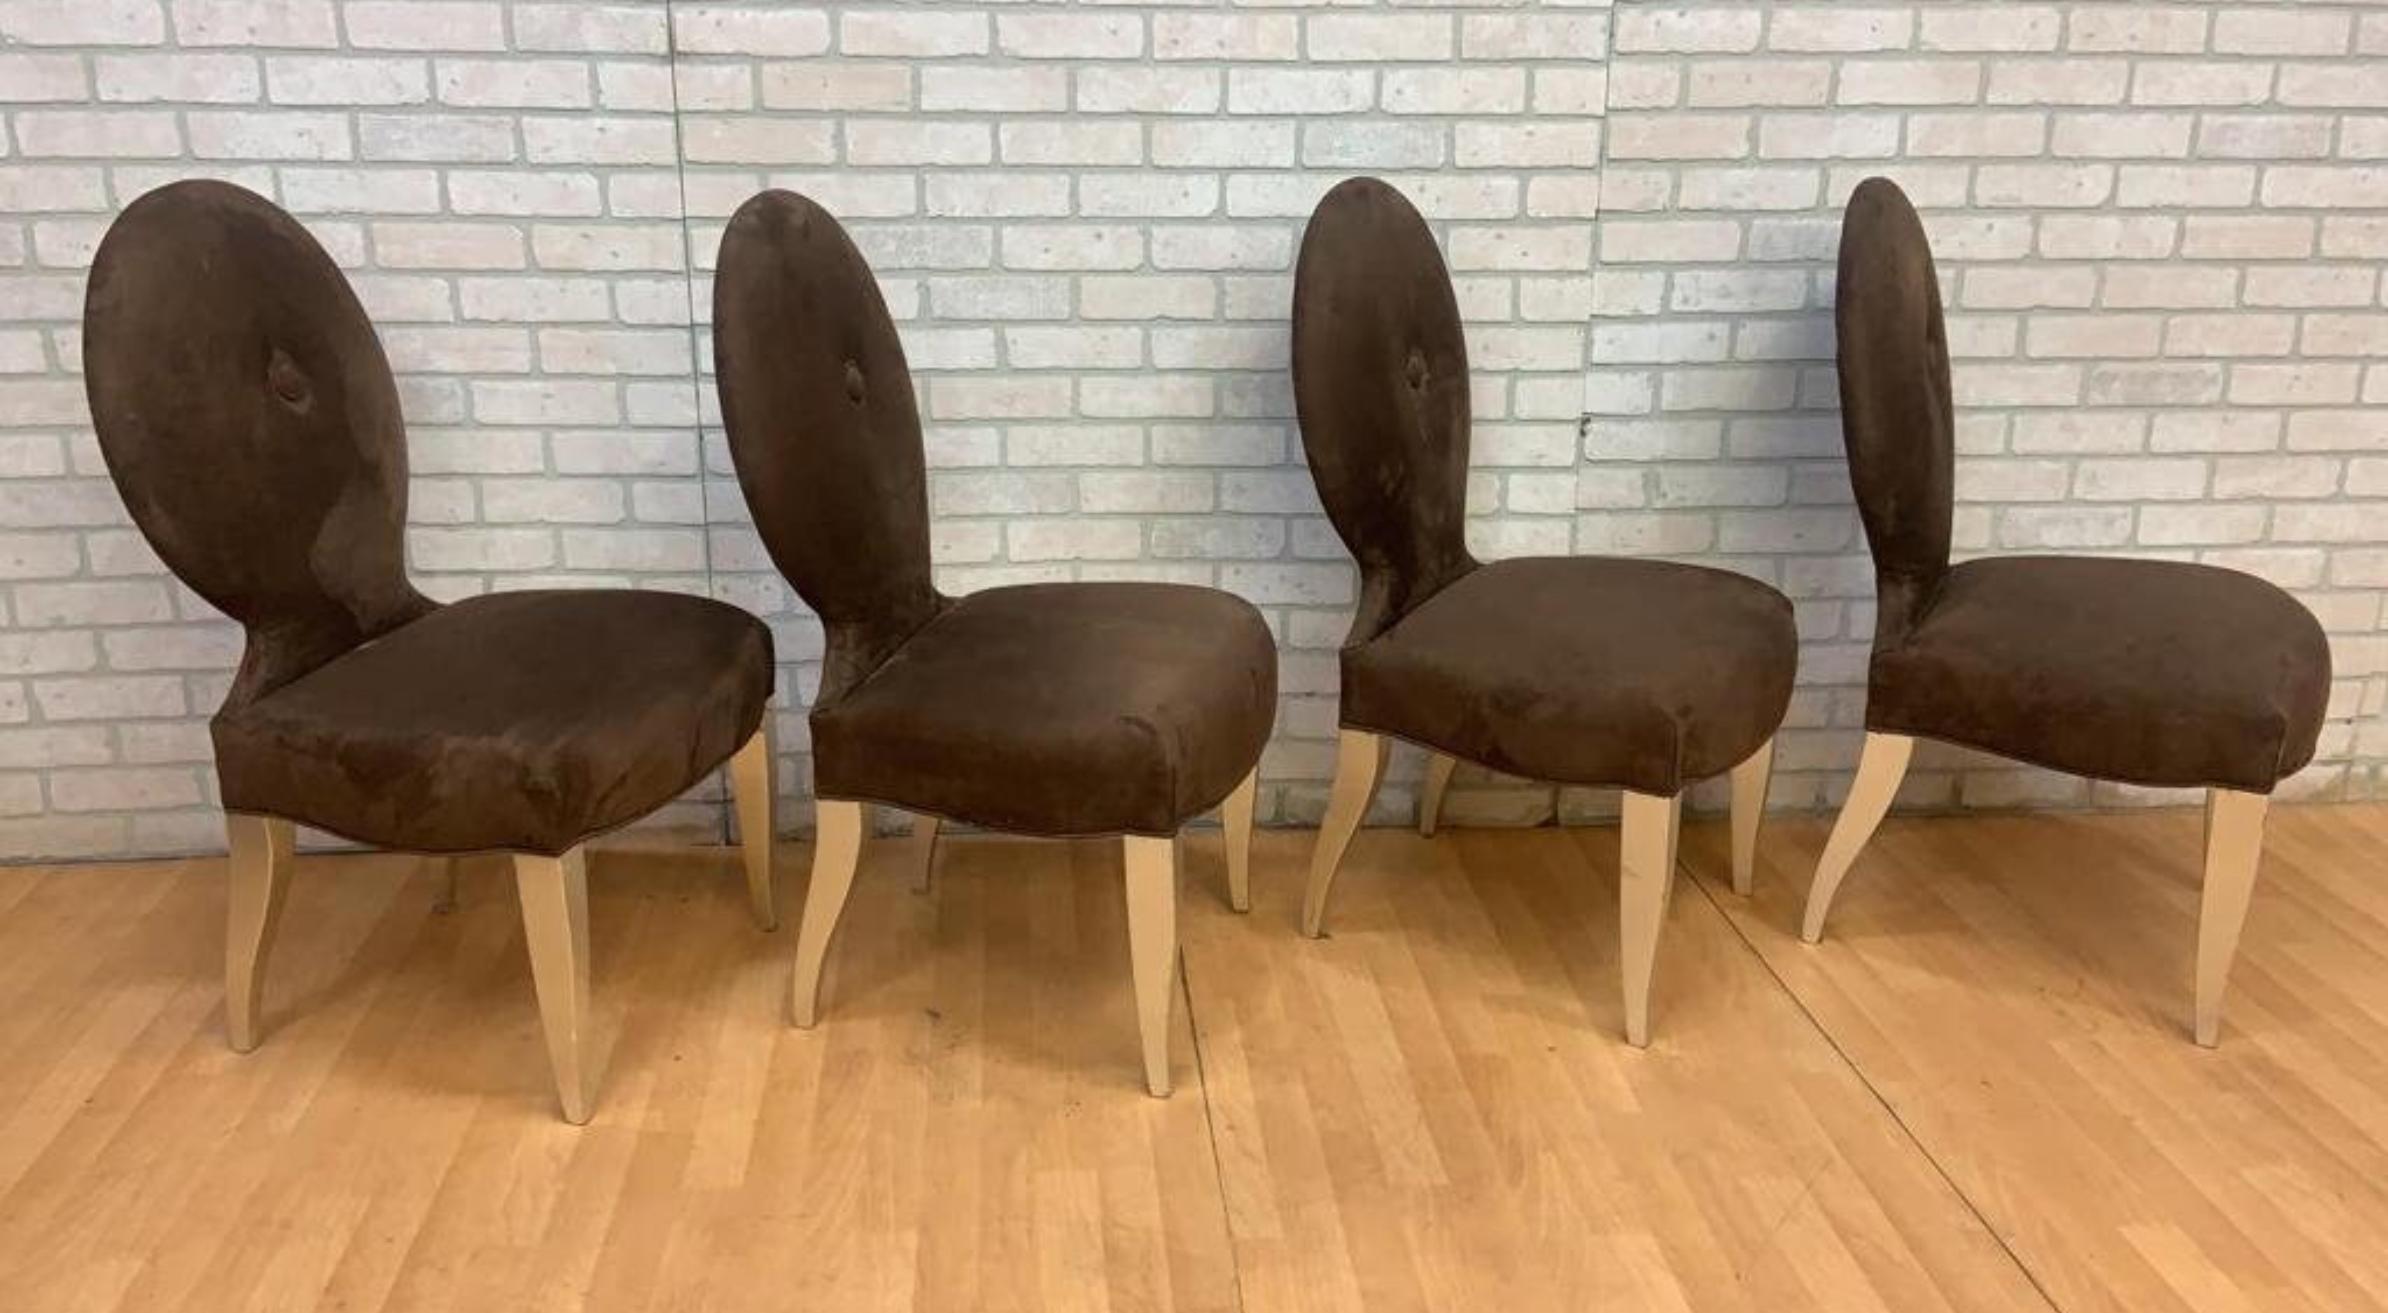 Art Deco Vintage Donghia Casper Dining Side Chairs in Brown Suede - Set of 4